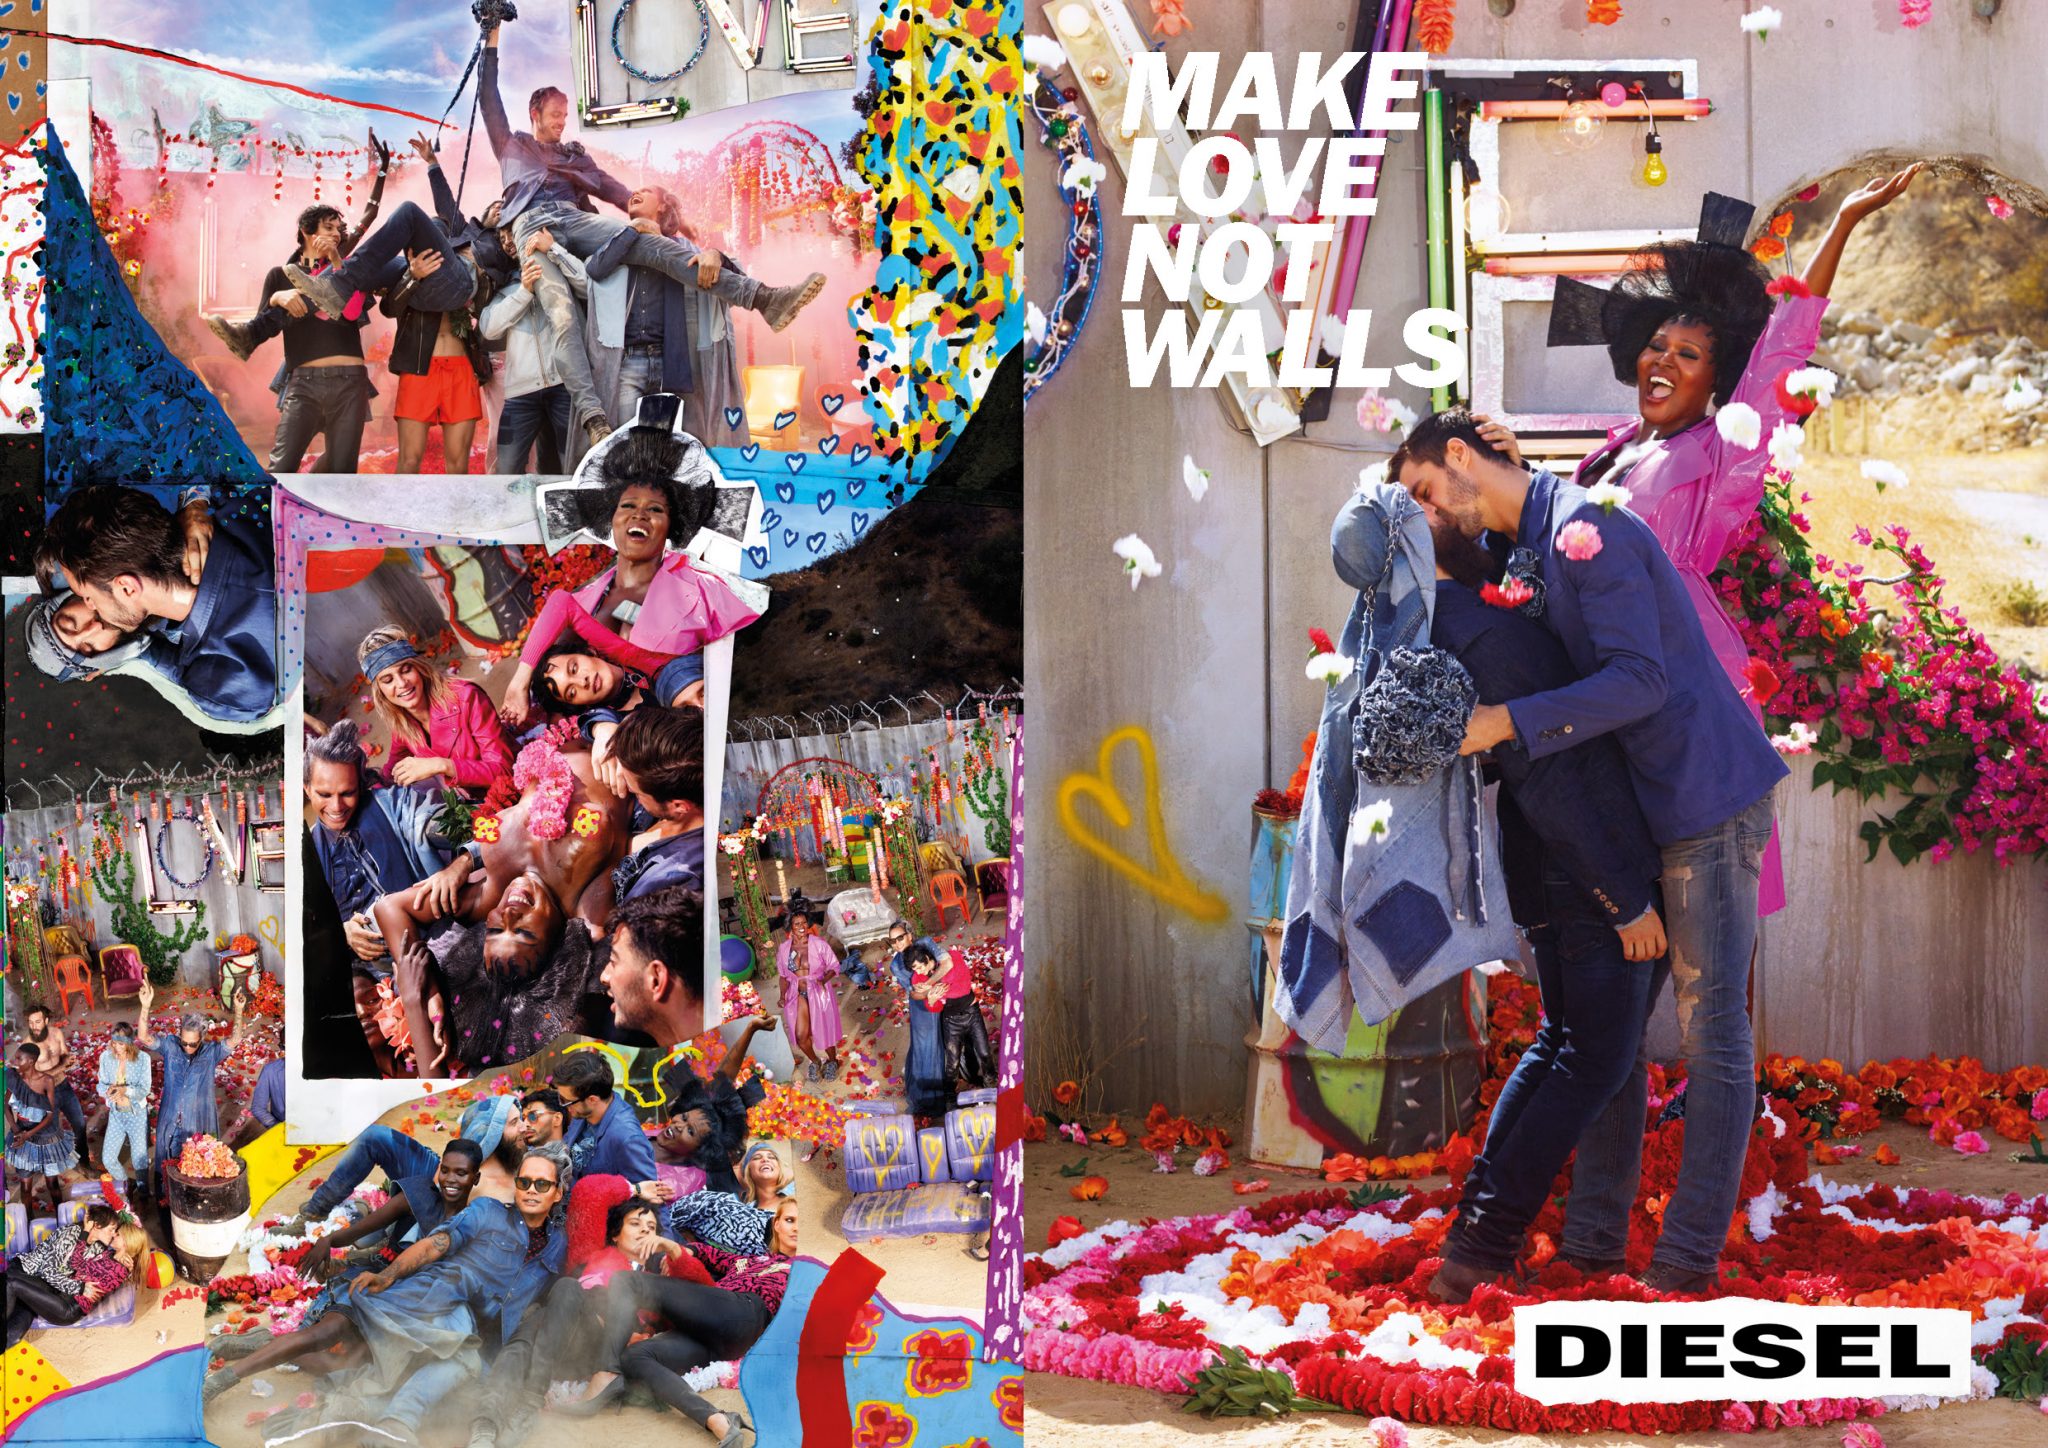 David LaChapelle | Diesel - Make love not walls | The award-winning multidisciplinary campaign launched with photography, a short film, and installations that traveled around the globe, putting forward a timely message that pays tribute to inclusion, love, diversity, and fraternity.| 14